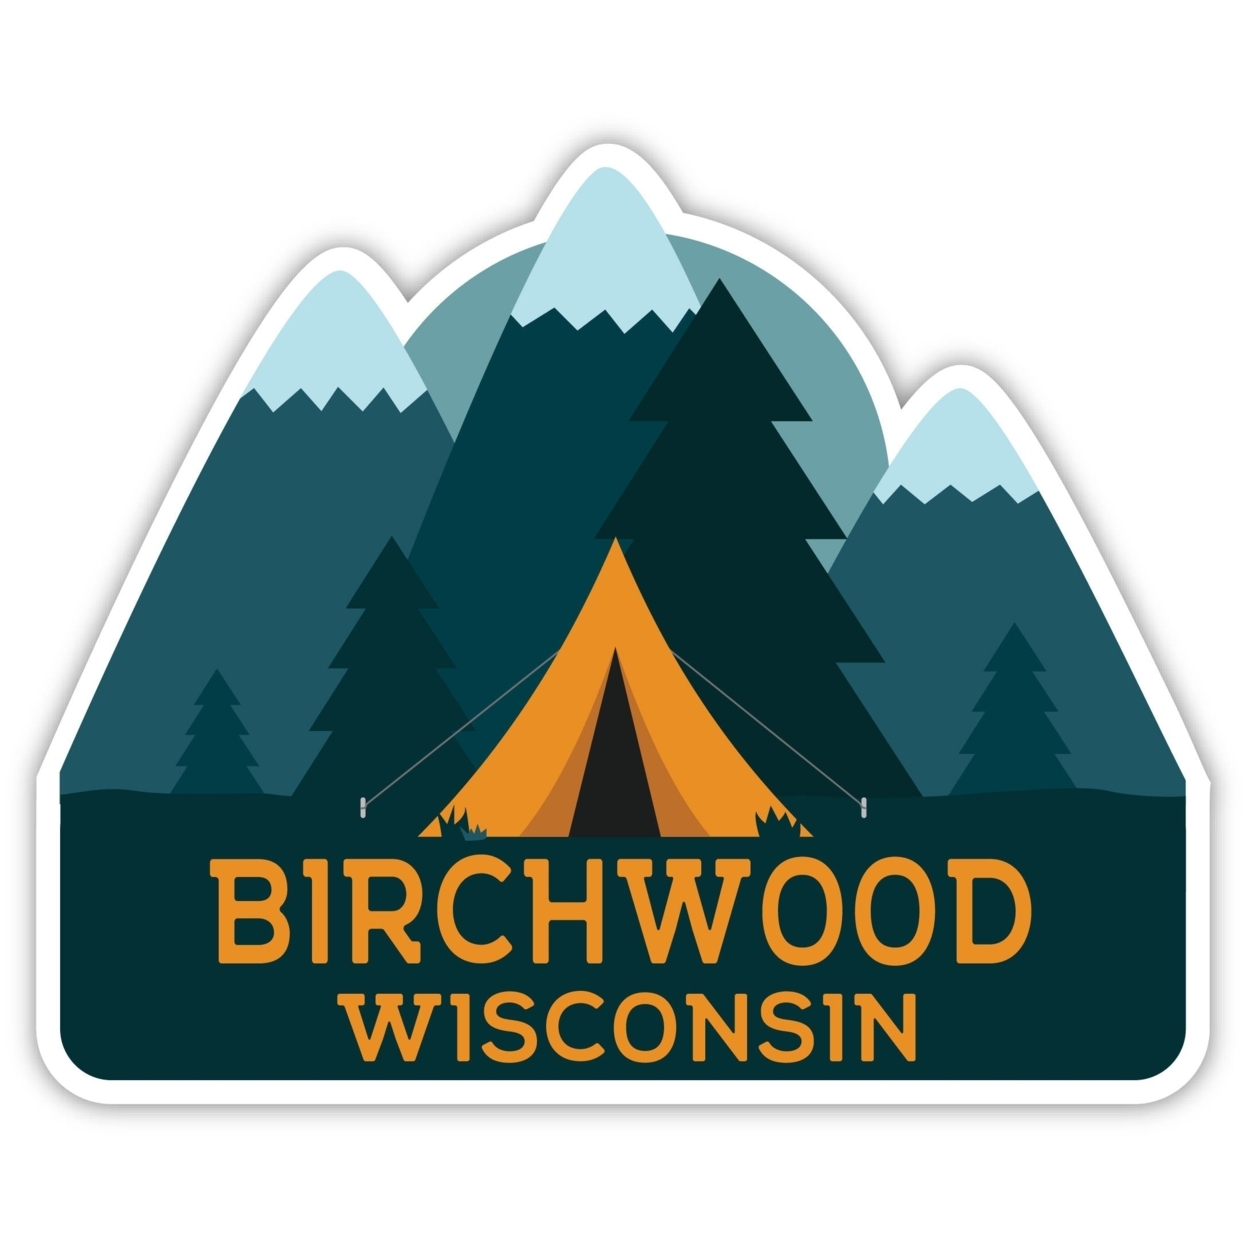 Birchwood Wisconsin Souvenir Decorative Stickers (Choose Theme And Size) - 4-Pack, 2-Inch, Tent